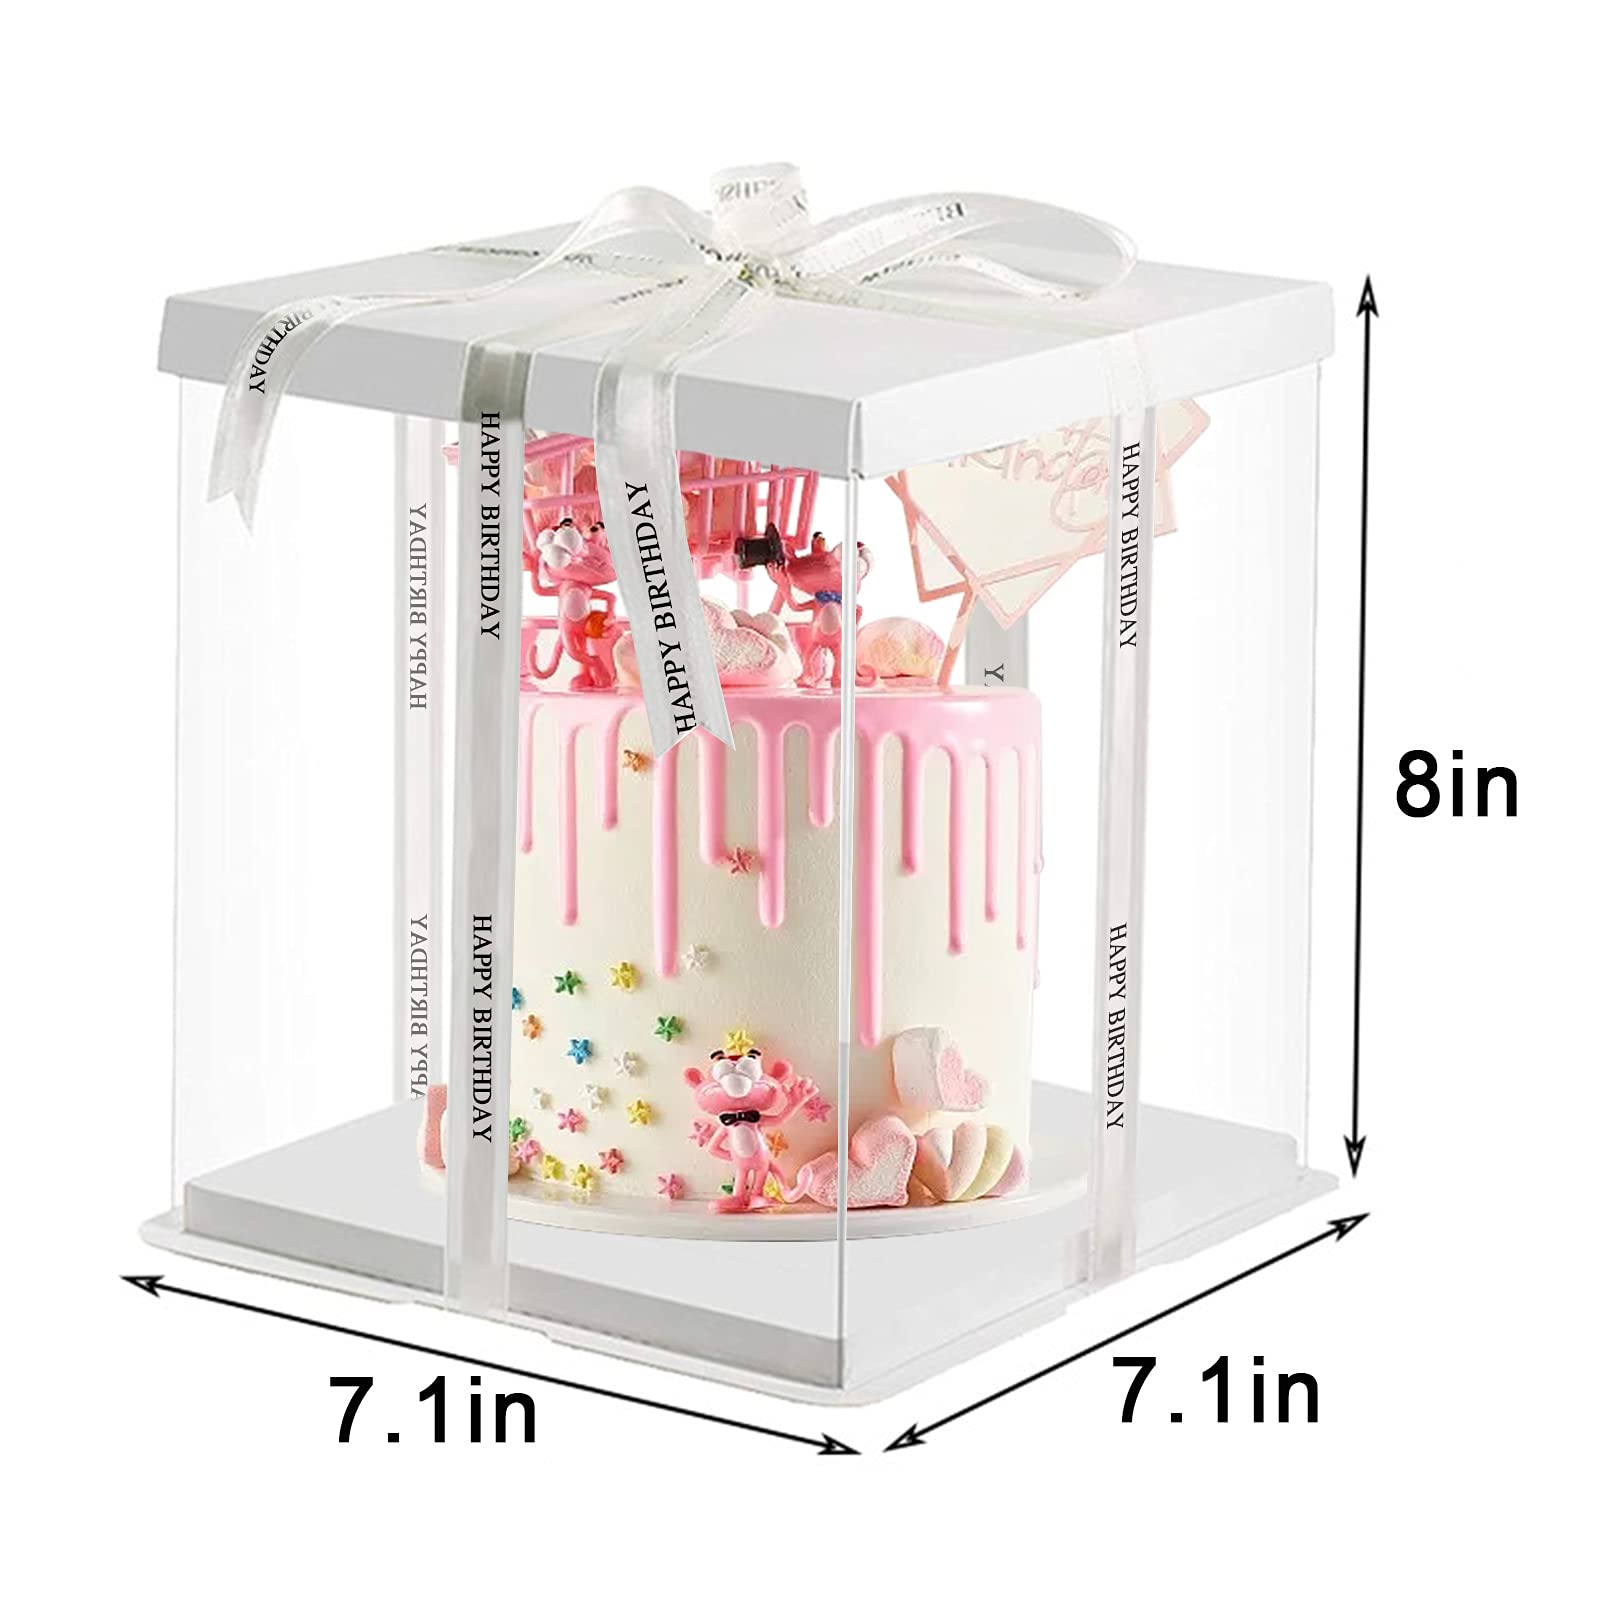 10Pcs PET Clear Cake Box,7x7x8 Inch Cake Packaging Boxes, Transparent Cake Boxes of Bakery, Clear Gift Boxes, Plastic Candy Box with Lid and Ribbon, Cake Carrier Display for Wedding Party Birthday